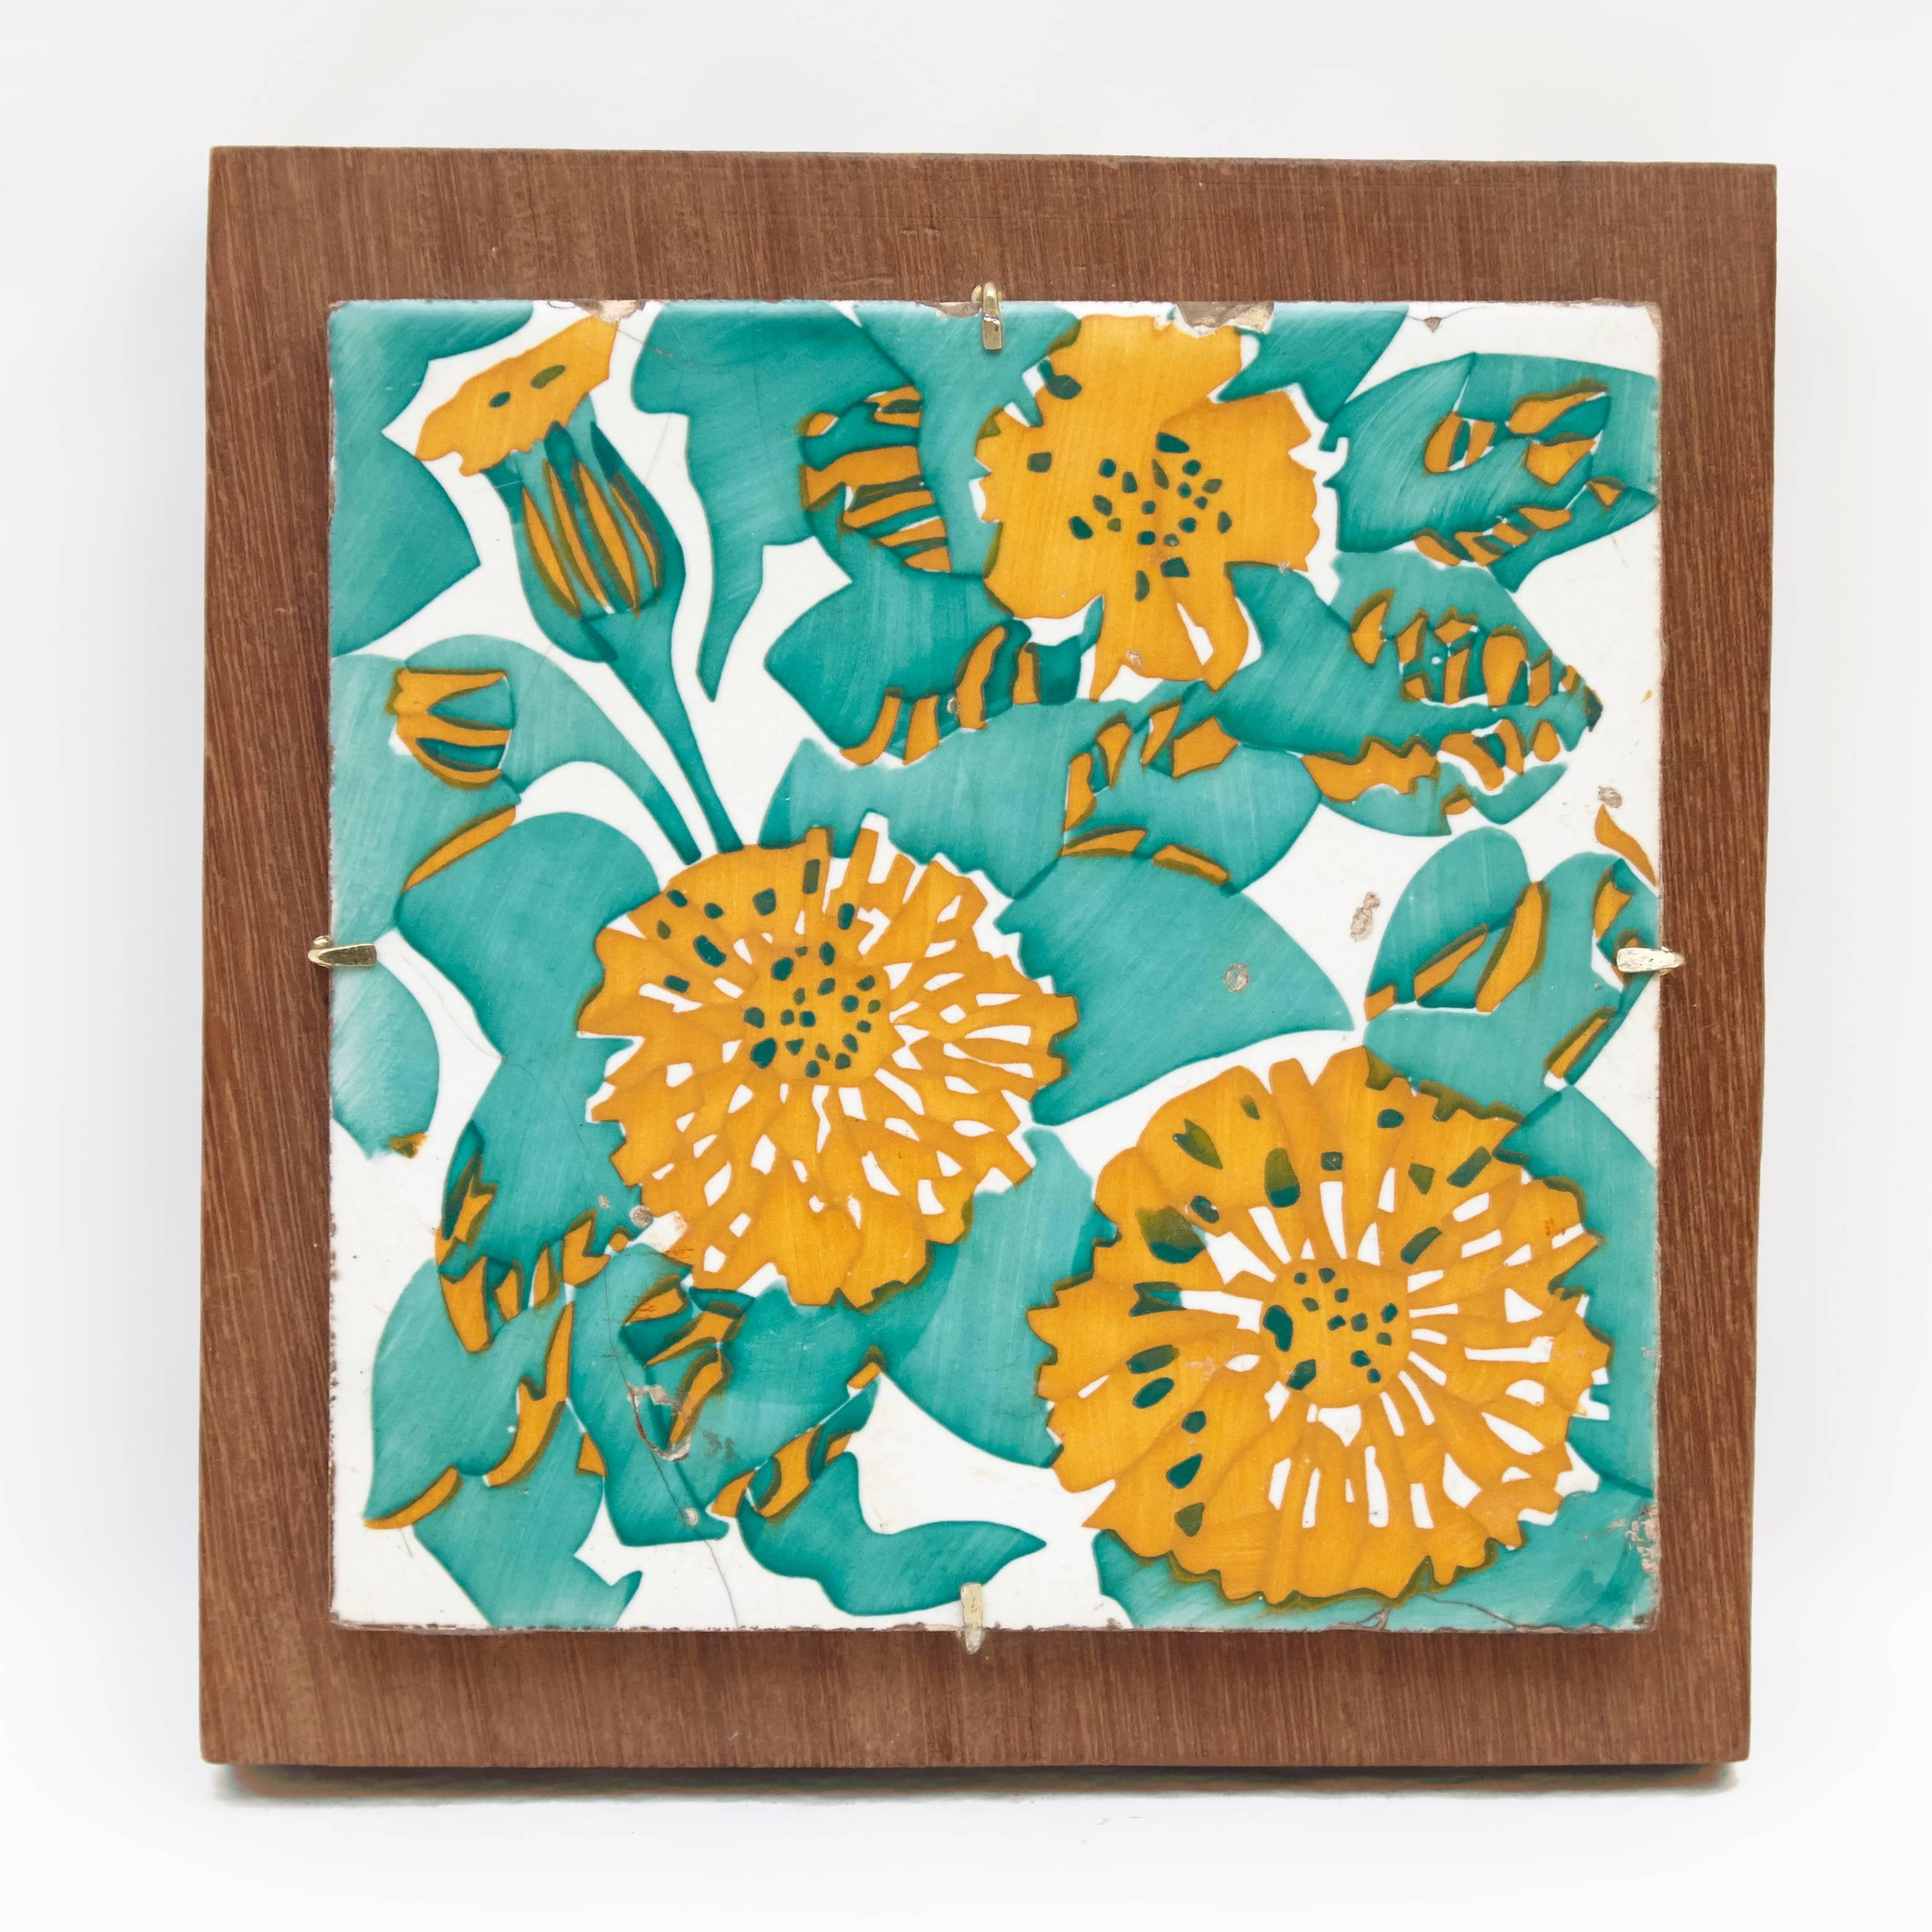 Decorative ceramic tiles by Antoni Gaudi, inspired by the marigold and dianthus motifs on the decorative ceramic tiles he designed for the facade of Casa Vicens, which constitute some of its most iconic features.

In good original condition, with